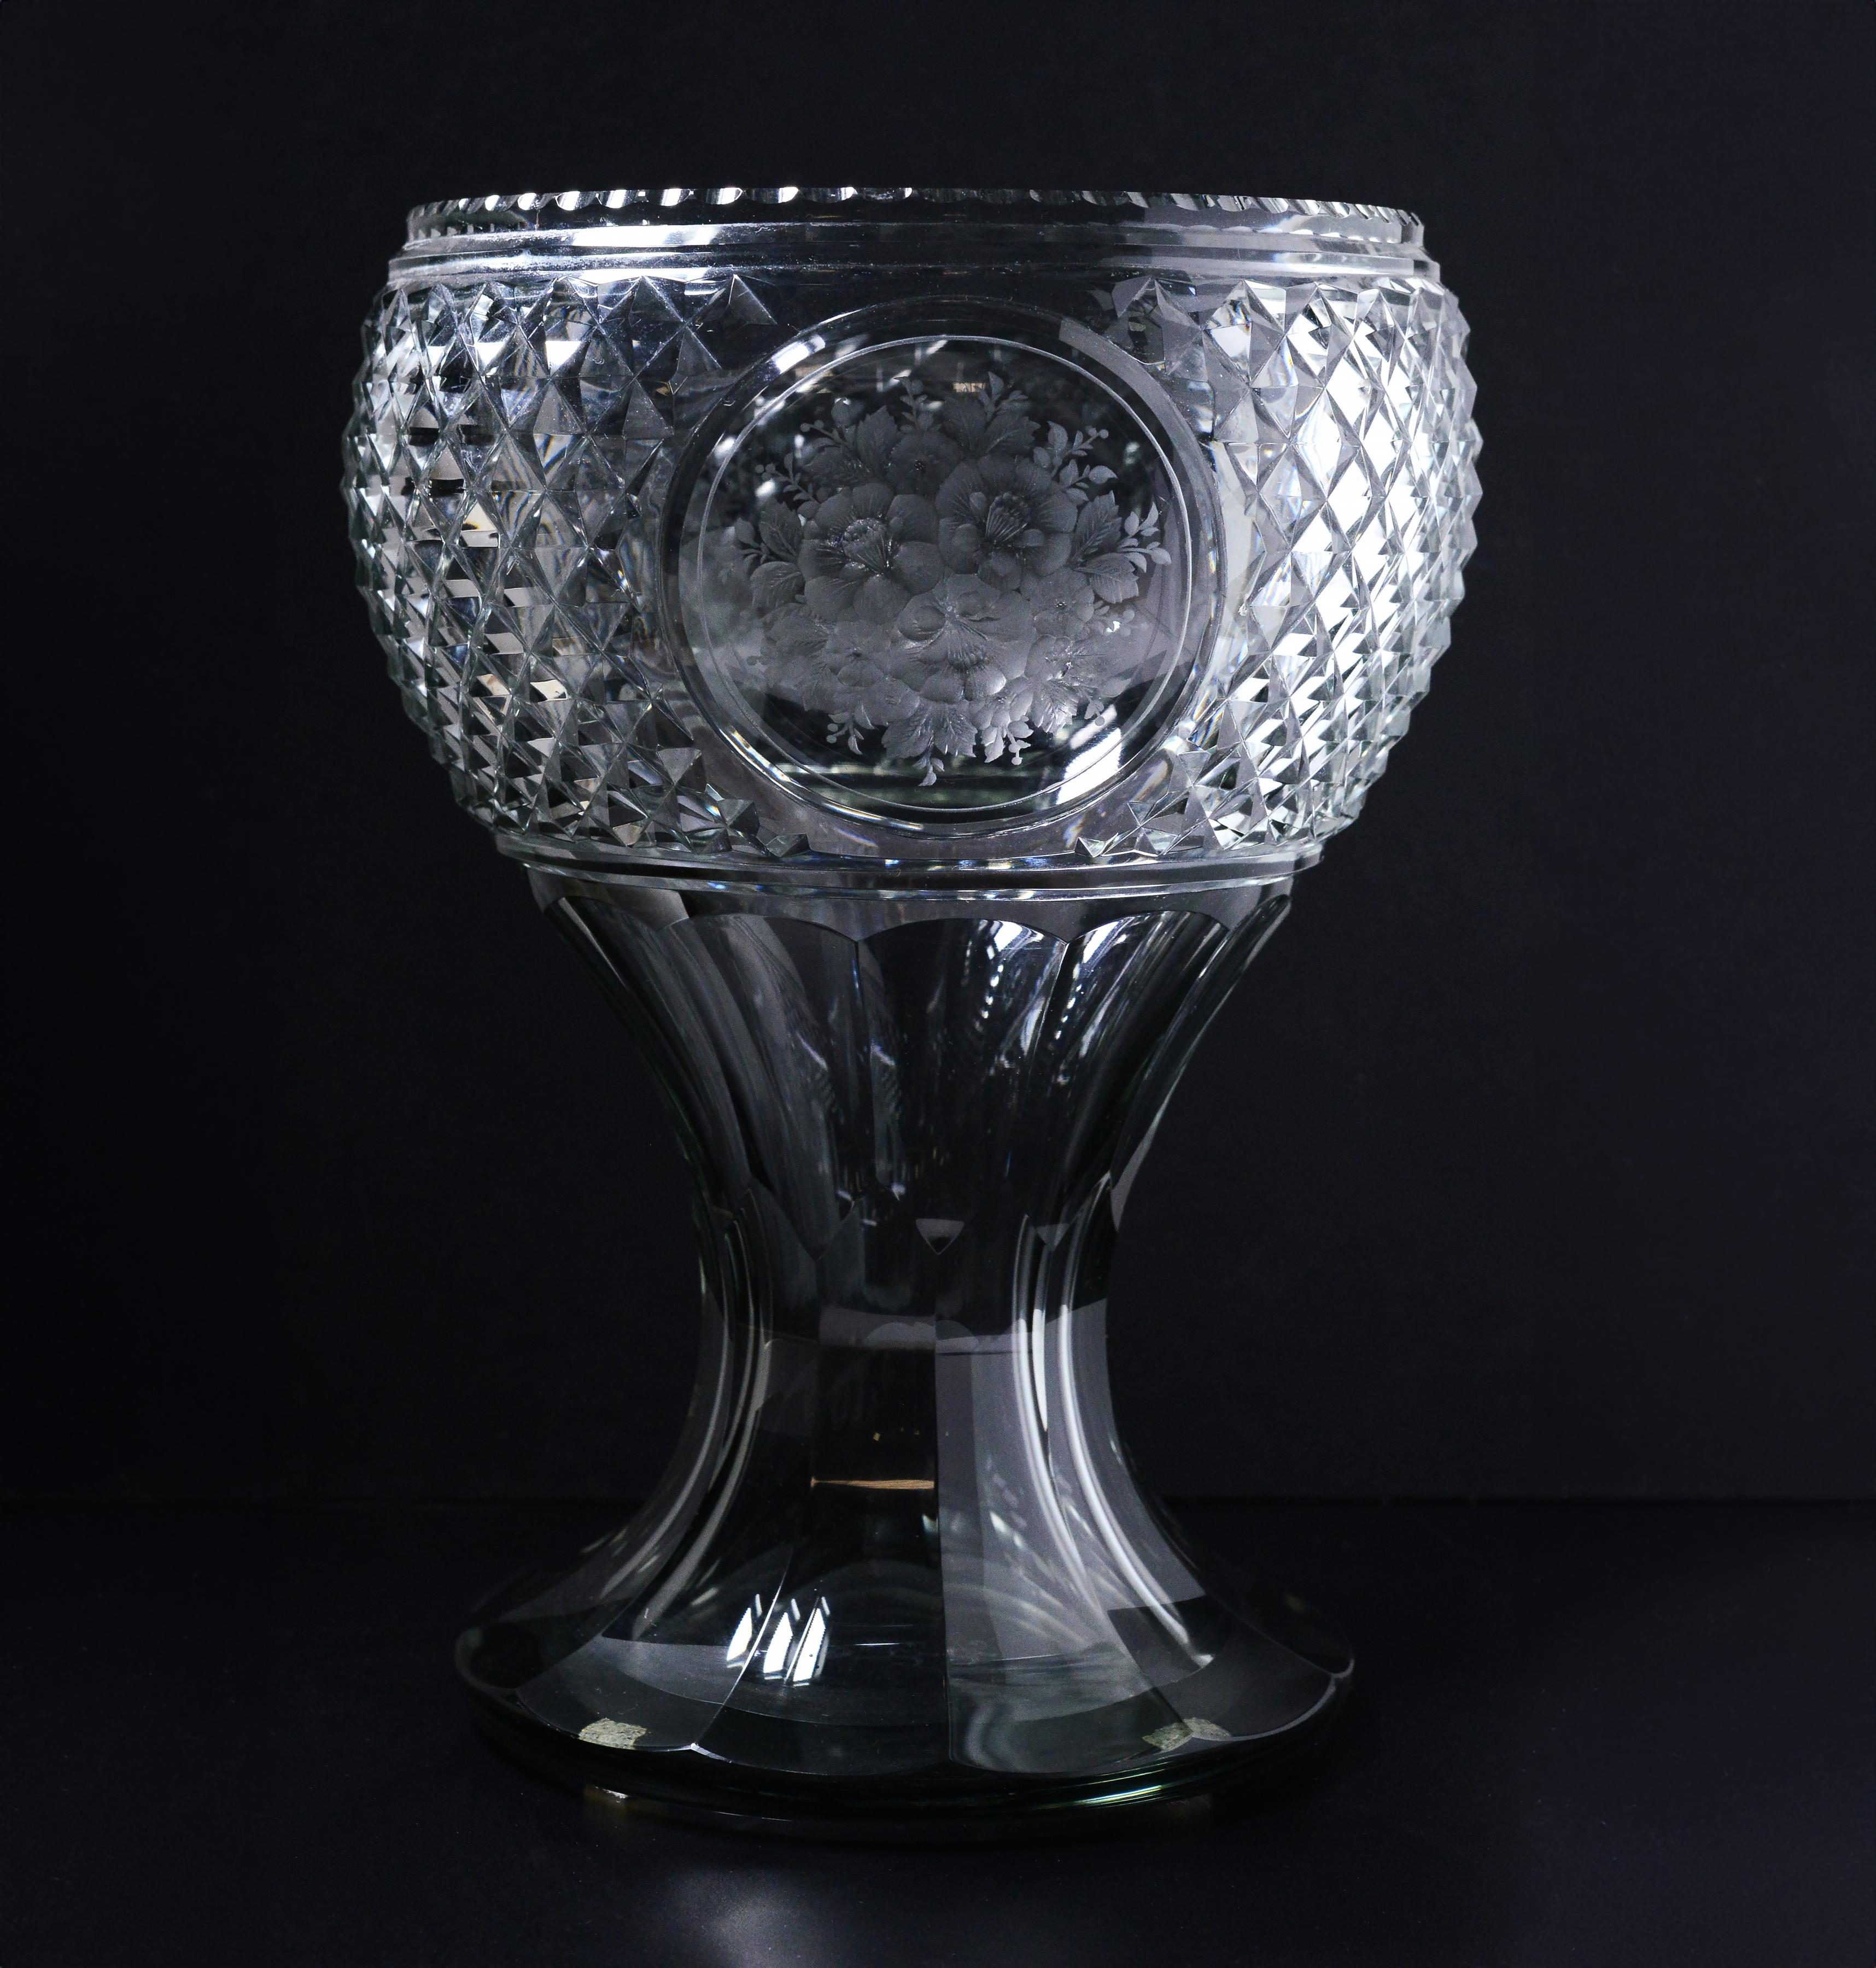 Gorgeous vase of lightly gray crystal glass, made with masterful skill by master glassblowers of past centuries, decorated with 3 round medallions of various garden flowers. Signed at bottom 